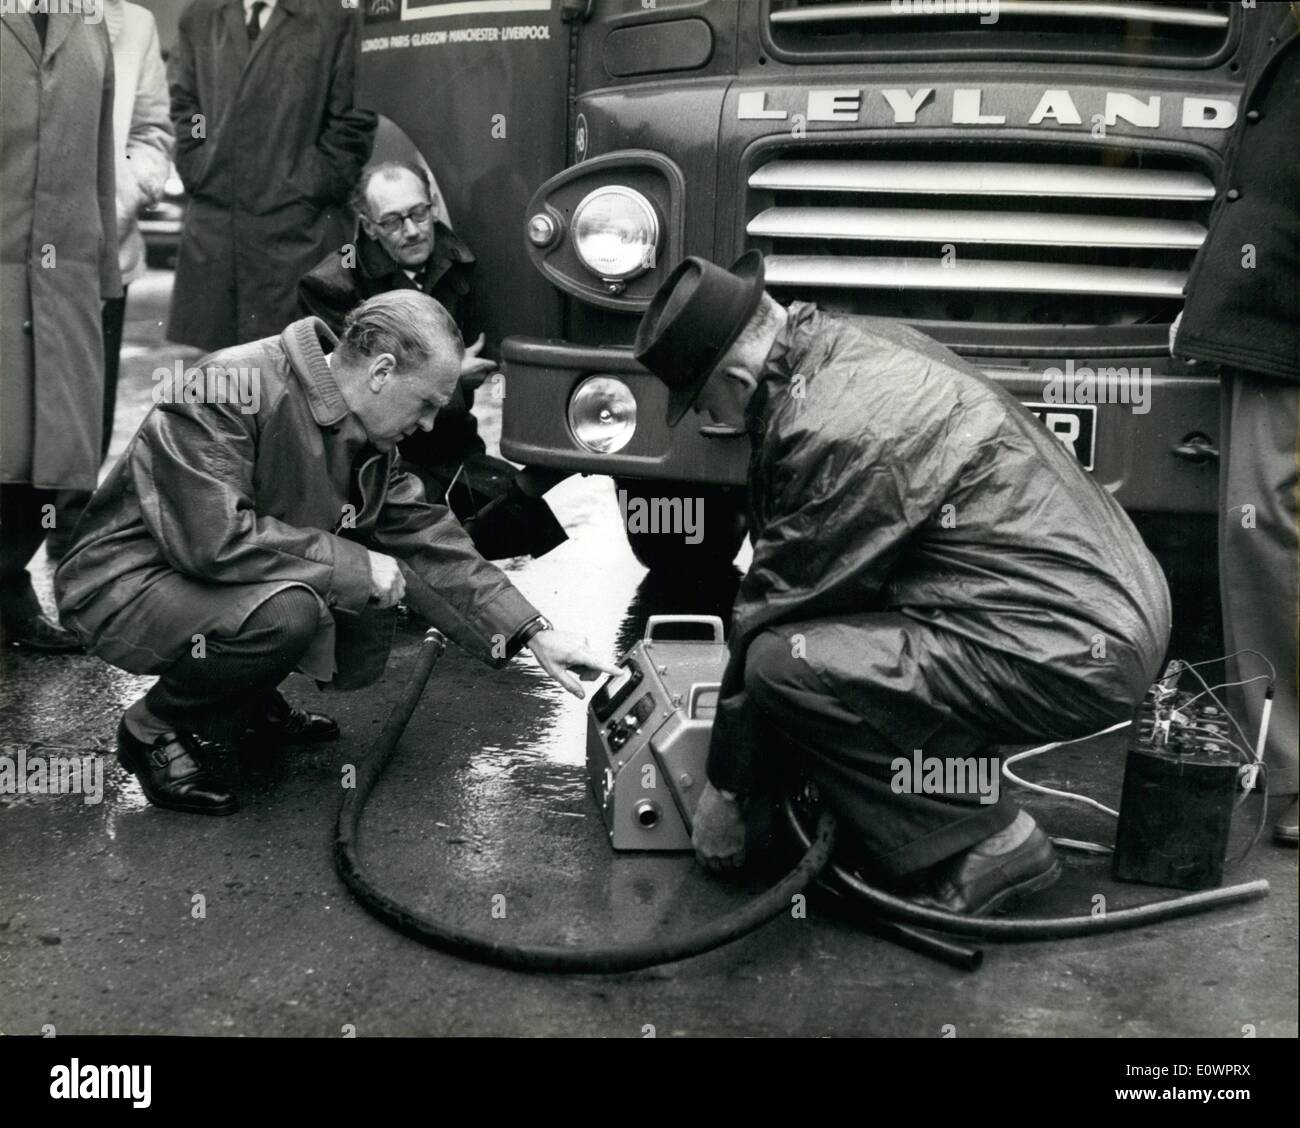 Nov. 11, 1963 - Mr. Marples checks for Diesel Fumes. The Transport Minister Mr. Ernest Marples, was present this morning at a roadside spot check on diesel engined goods vehicles emitting excessive smoke. These checks are carried out by Ministry examiners in conjunction with the police. Photo shows: Mr. Marple checks the amount of smoke pollution from a lorry by means of a special machine connected to the exhaust pipe. Stock Photo